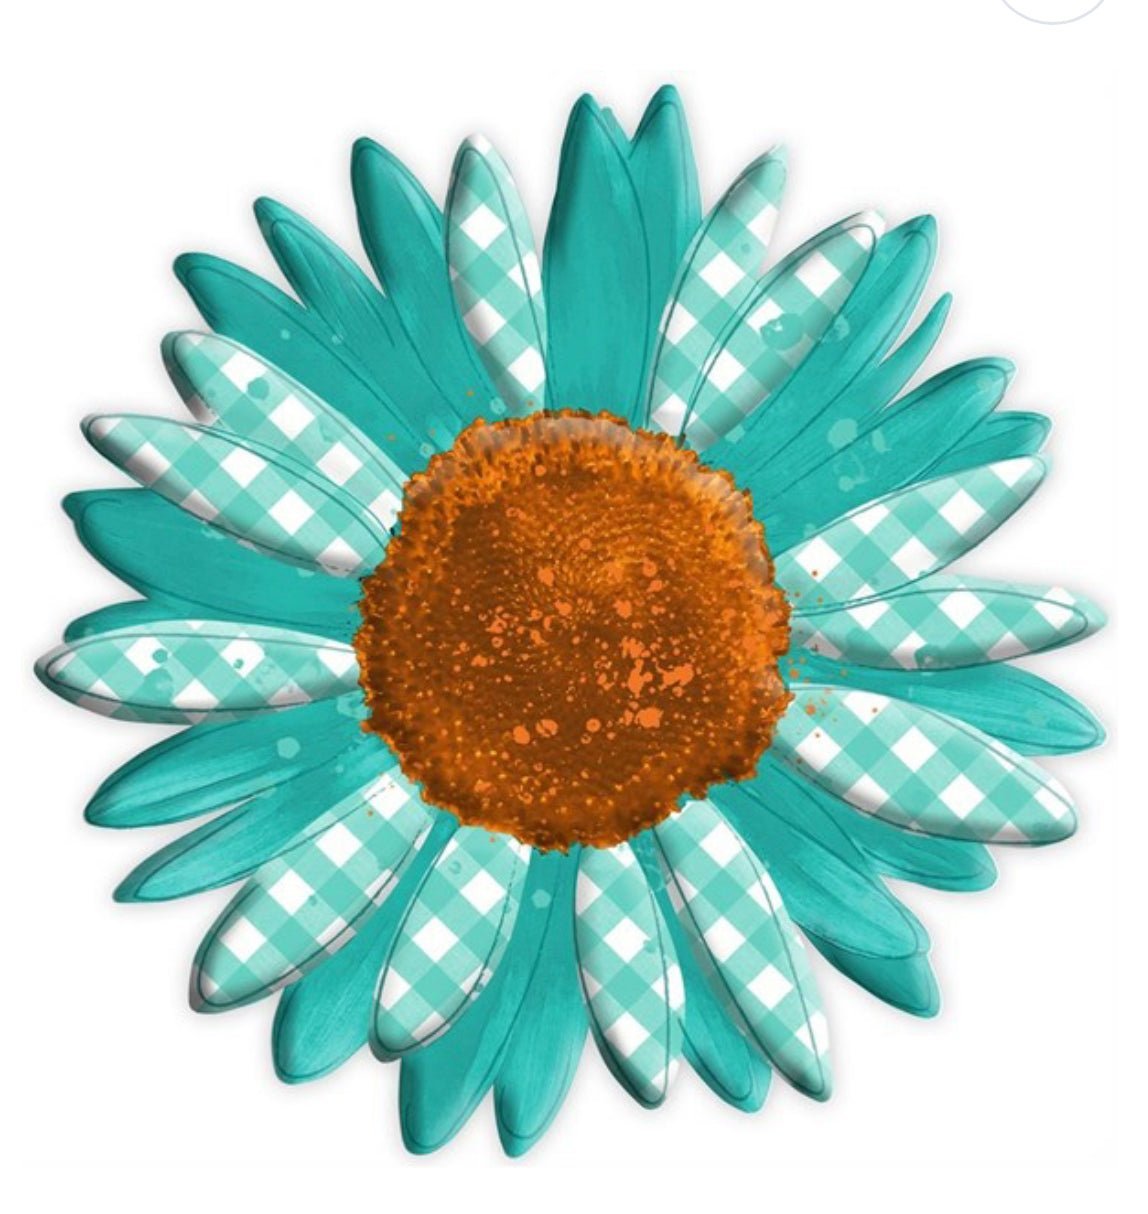 Sunflower, embossed metal, sign for wreaths - blue and orange MD078437 - Greenery MarketSeasonal & Holiday DecorationsMD078437